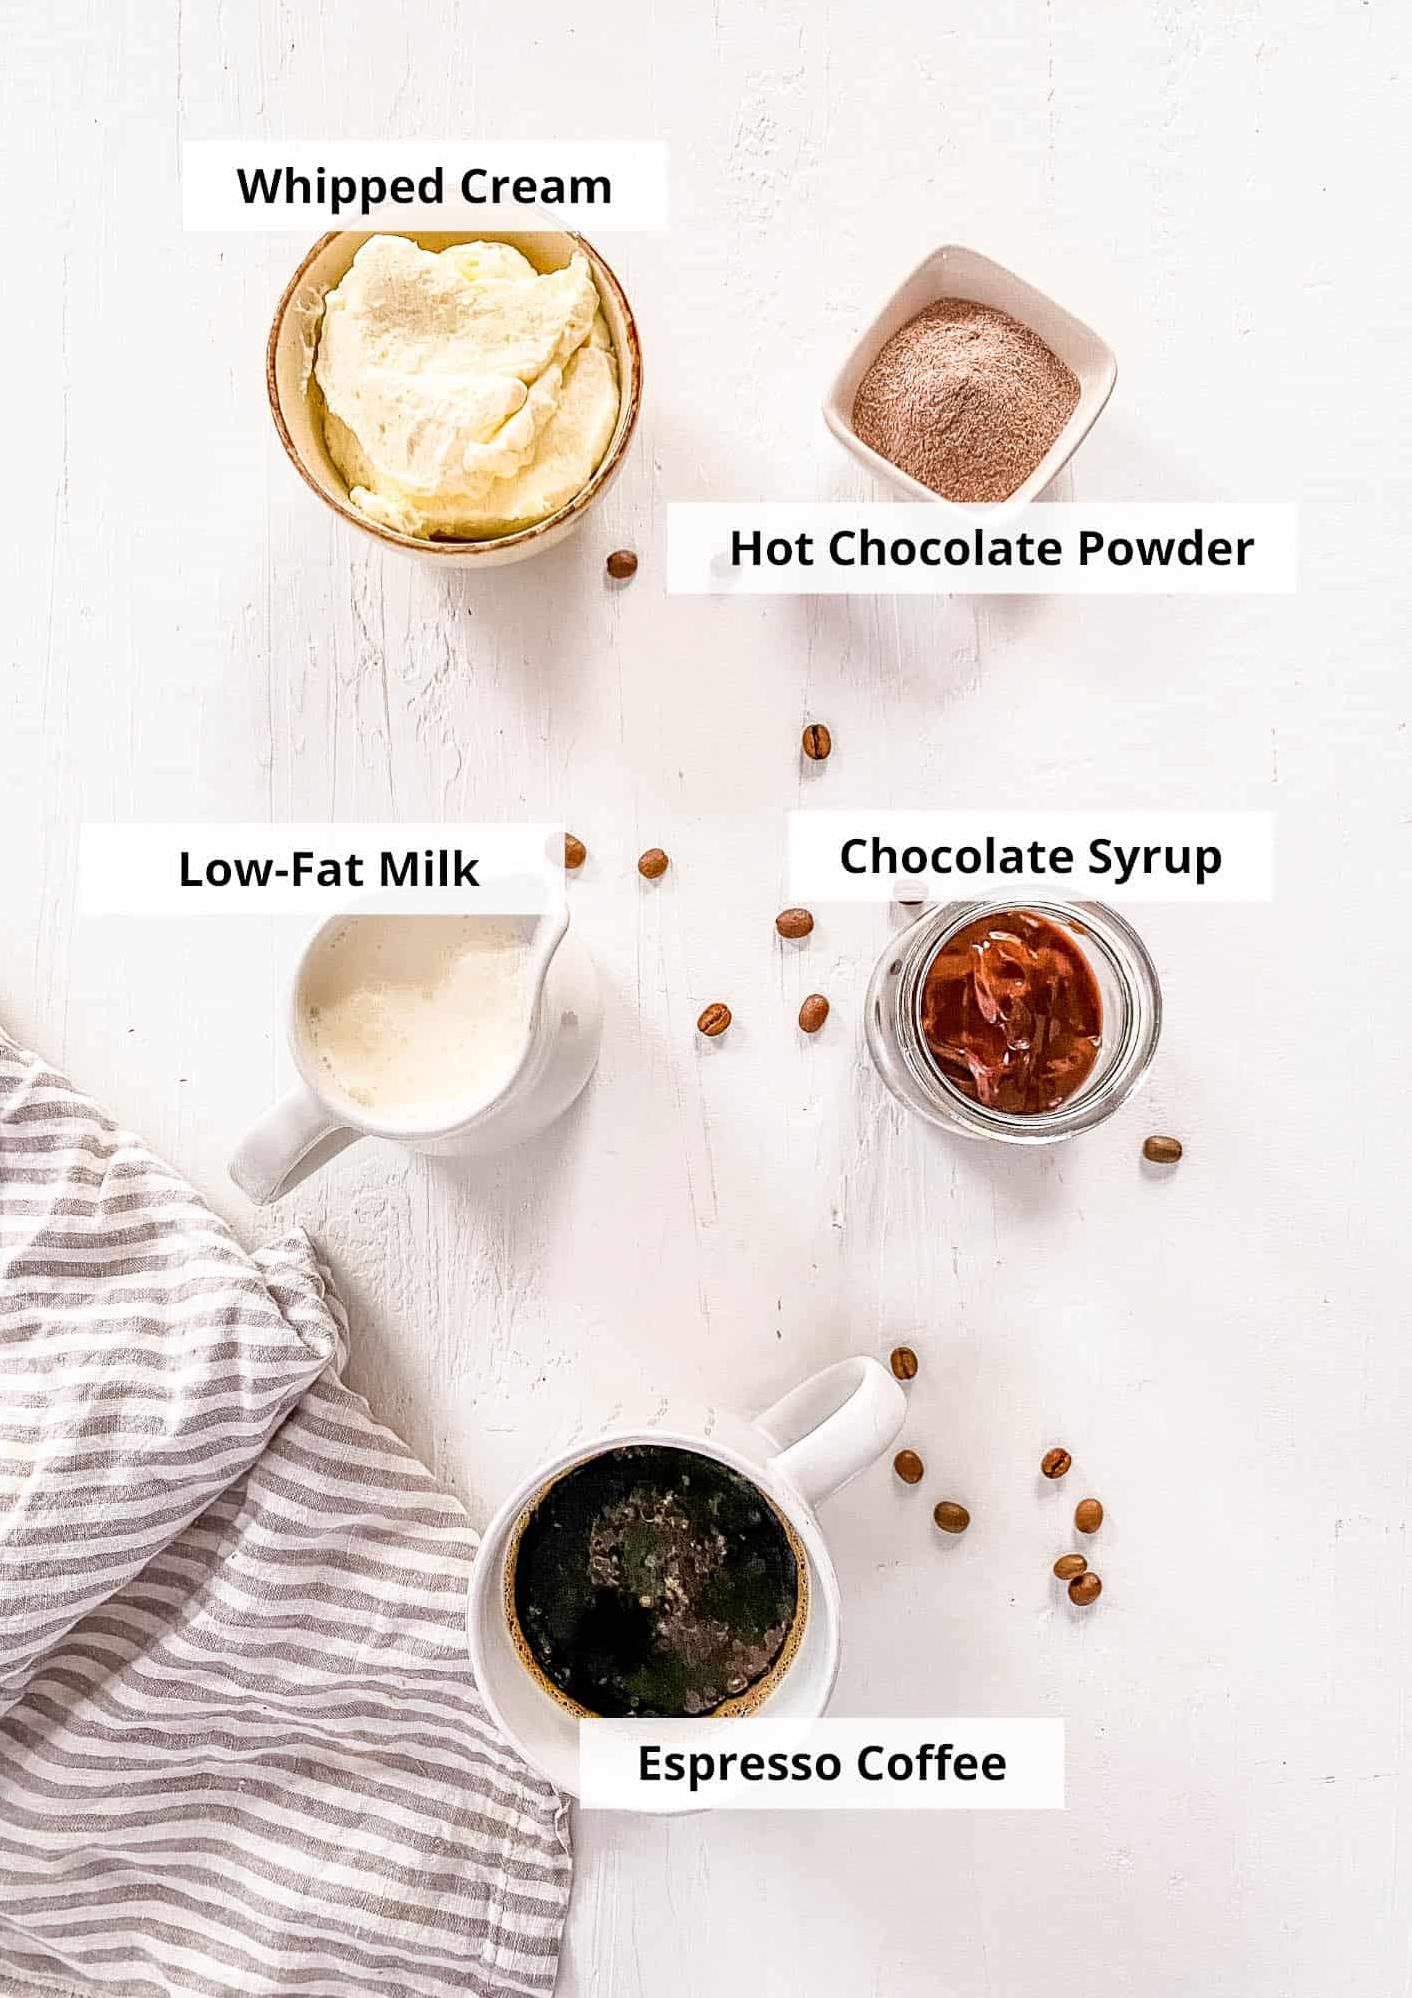  A healthier alternative to sugary coffee drinks without sacrificing taste.